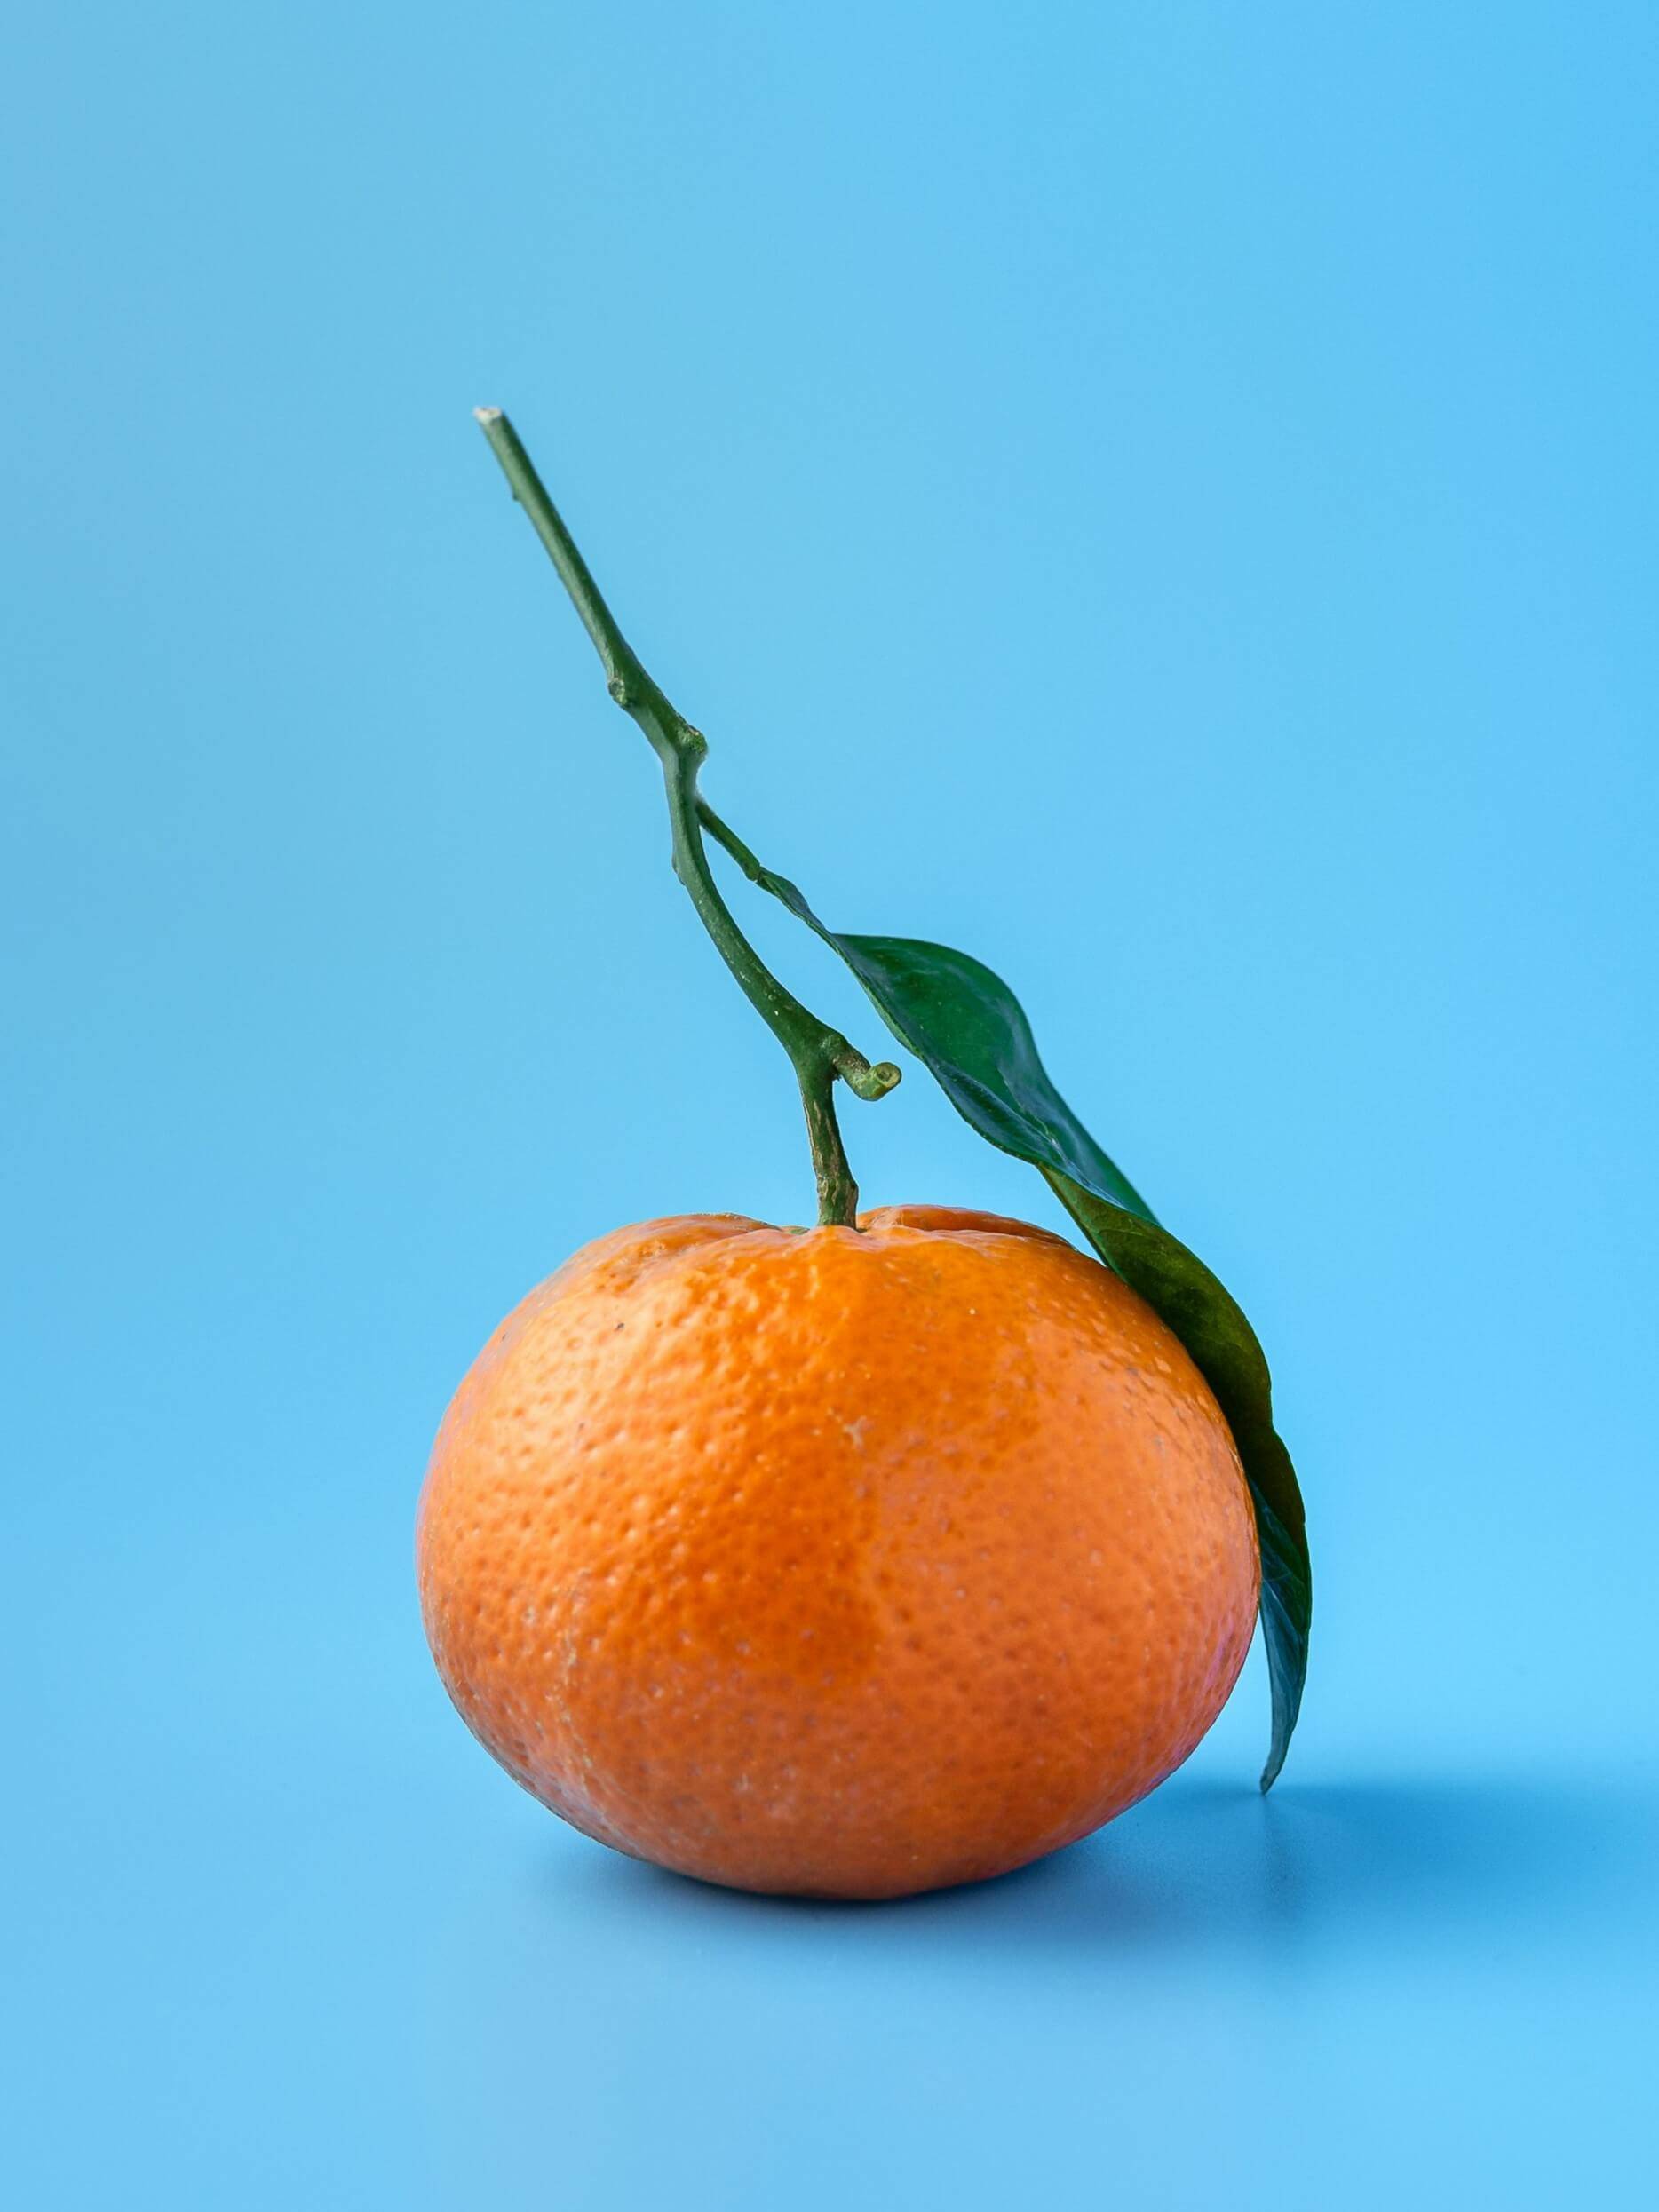 A small mandarin orange with a long stem against a blue background.